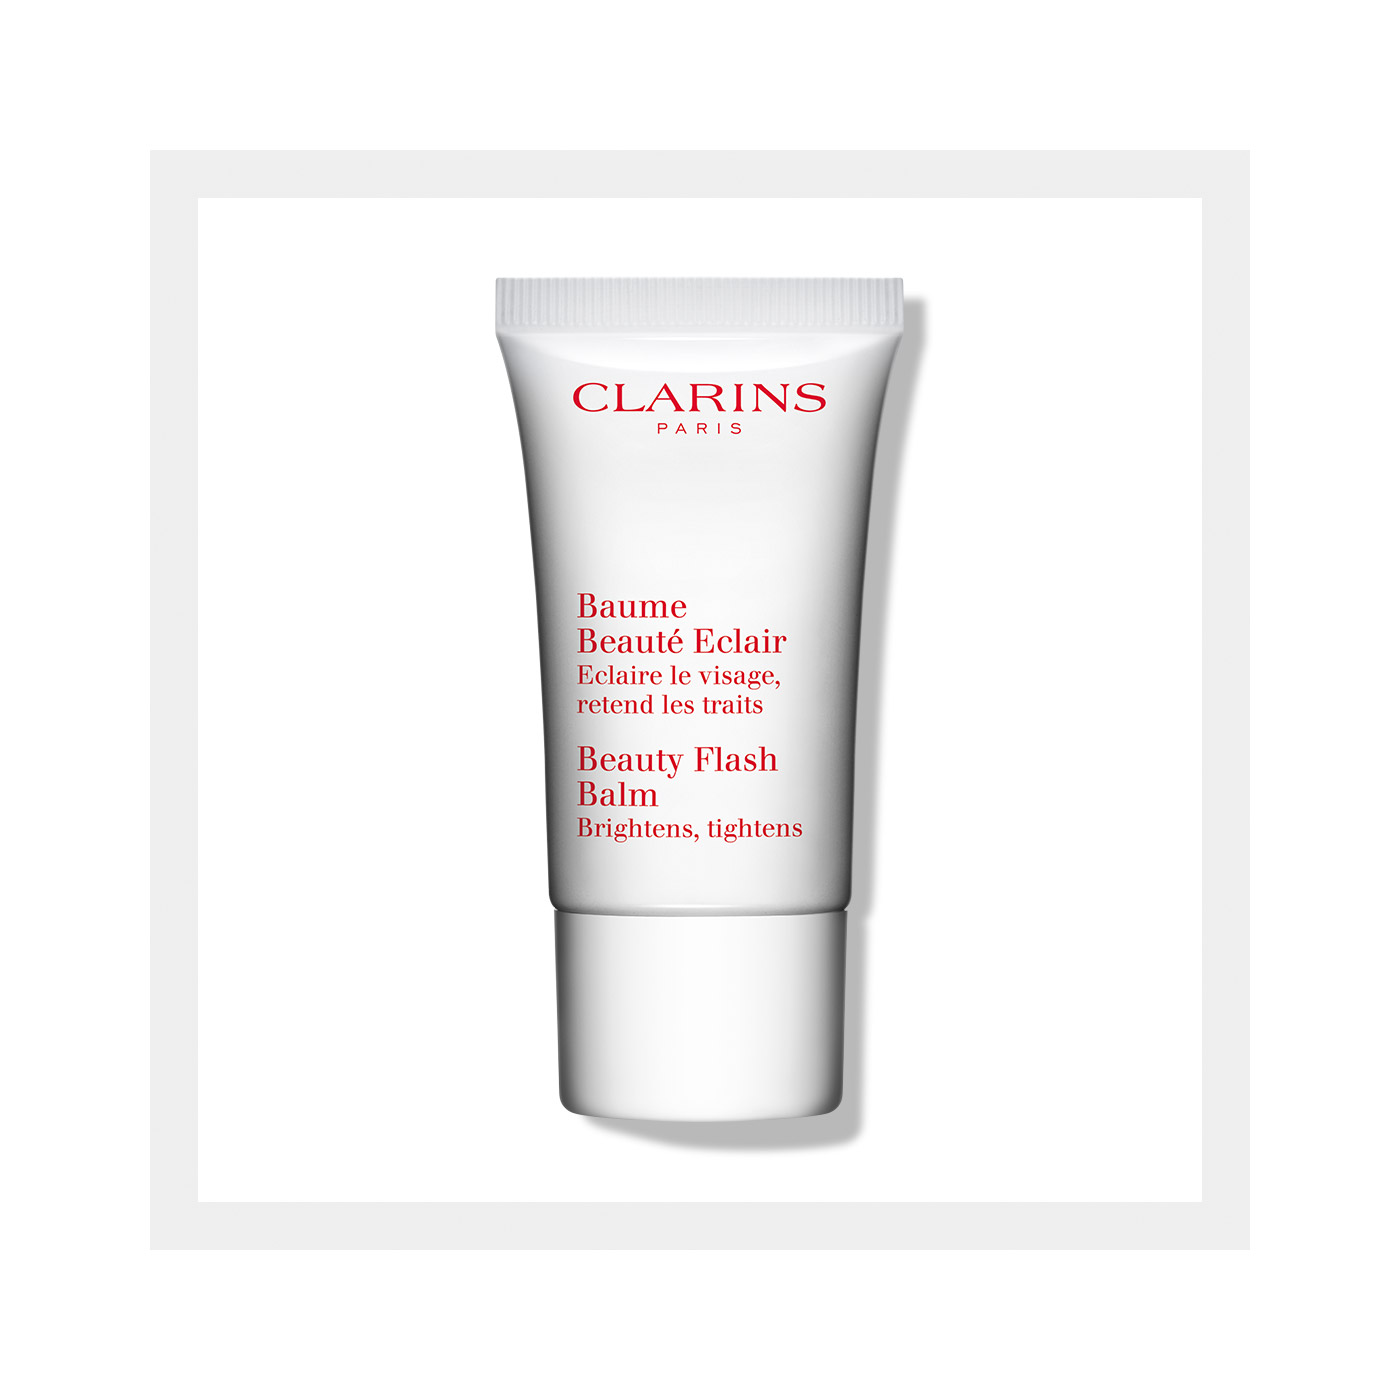 Beauty Flash Balm Best Anti Aging Solution Clarins